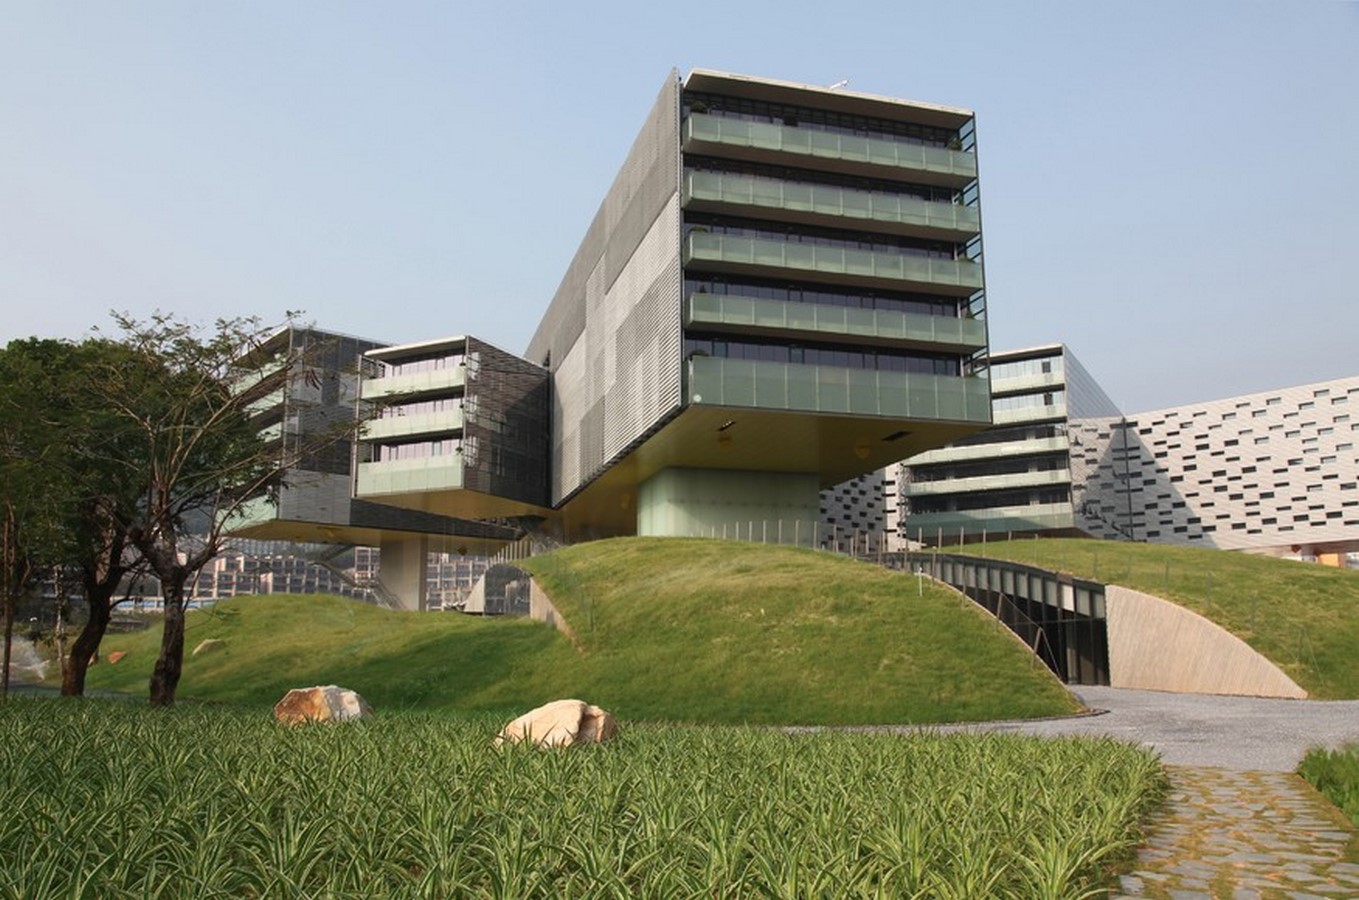 20 Most sustainable buildings in the world! - Sheet8